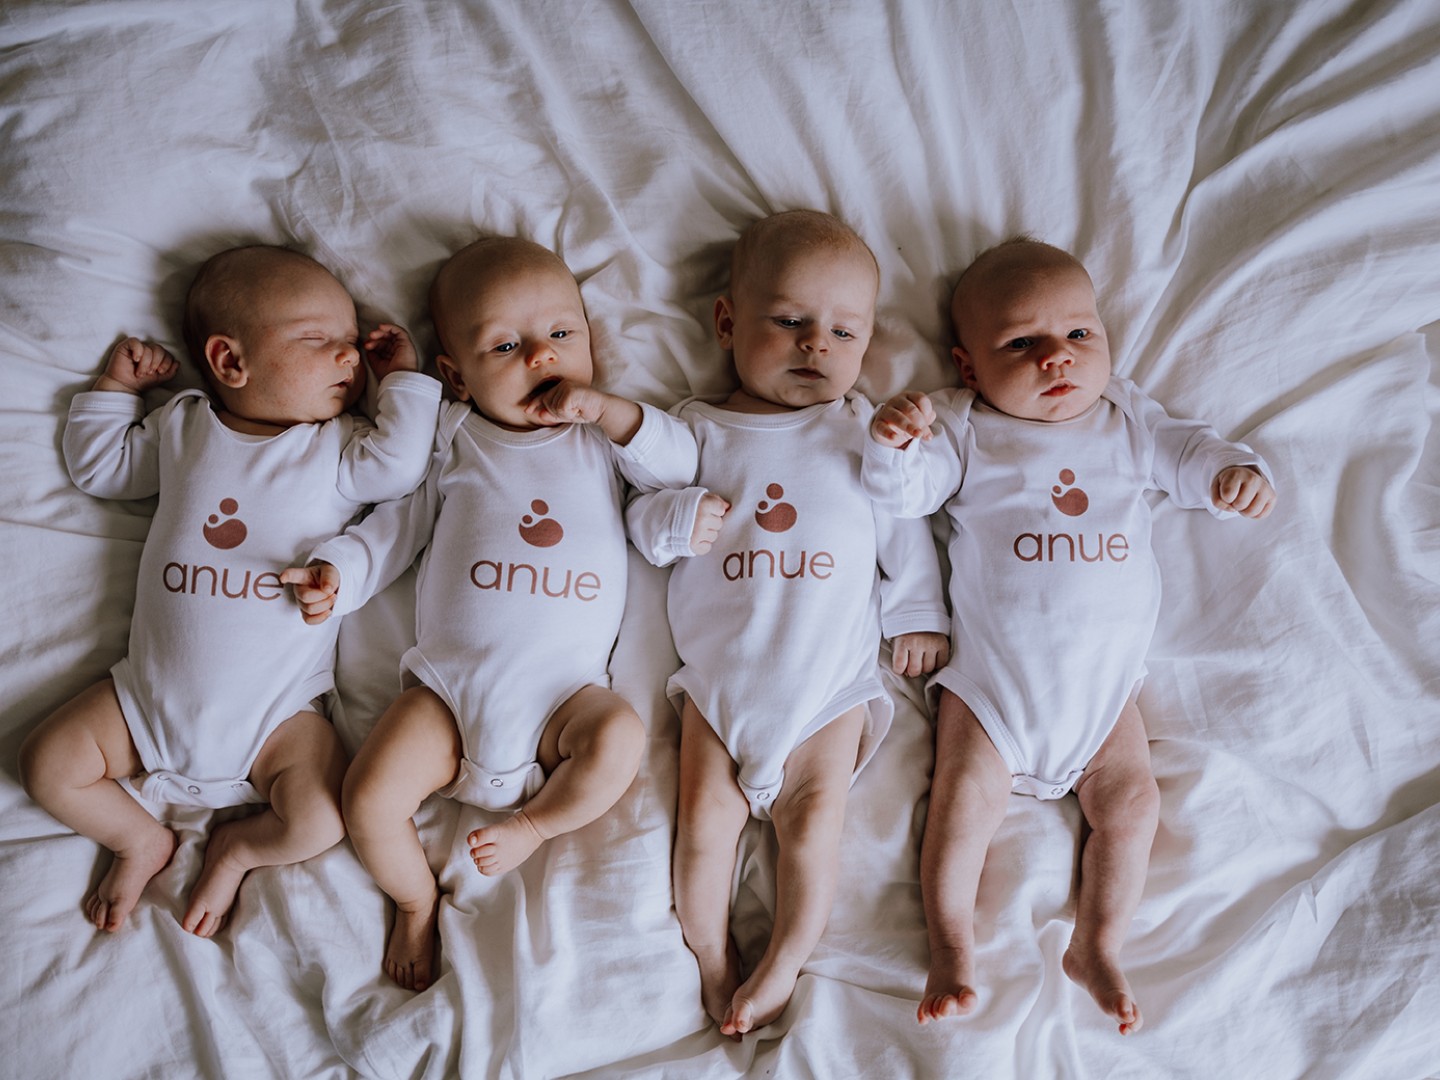 Four babies in a bed with bodysuits marked with Anue.